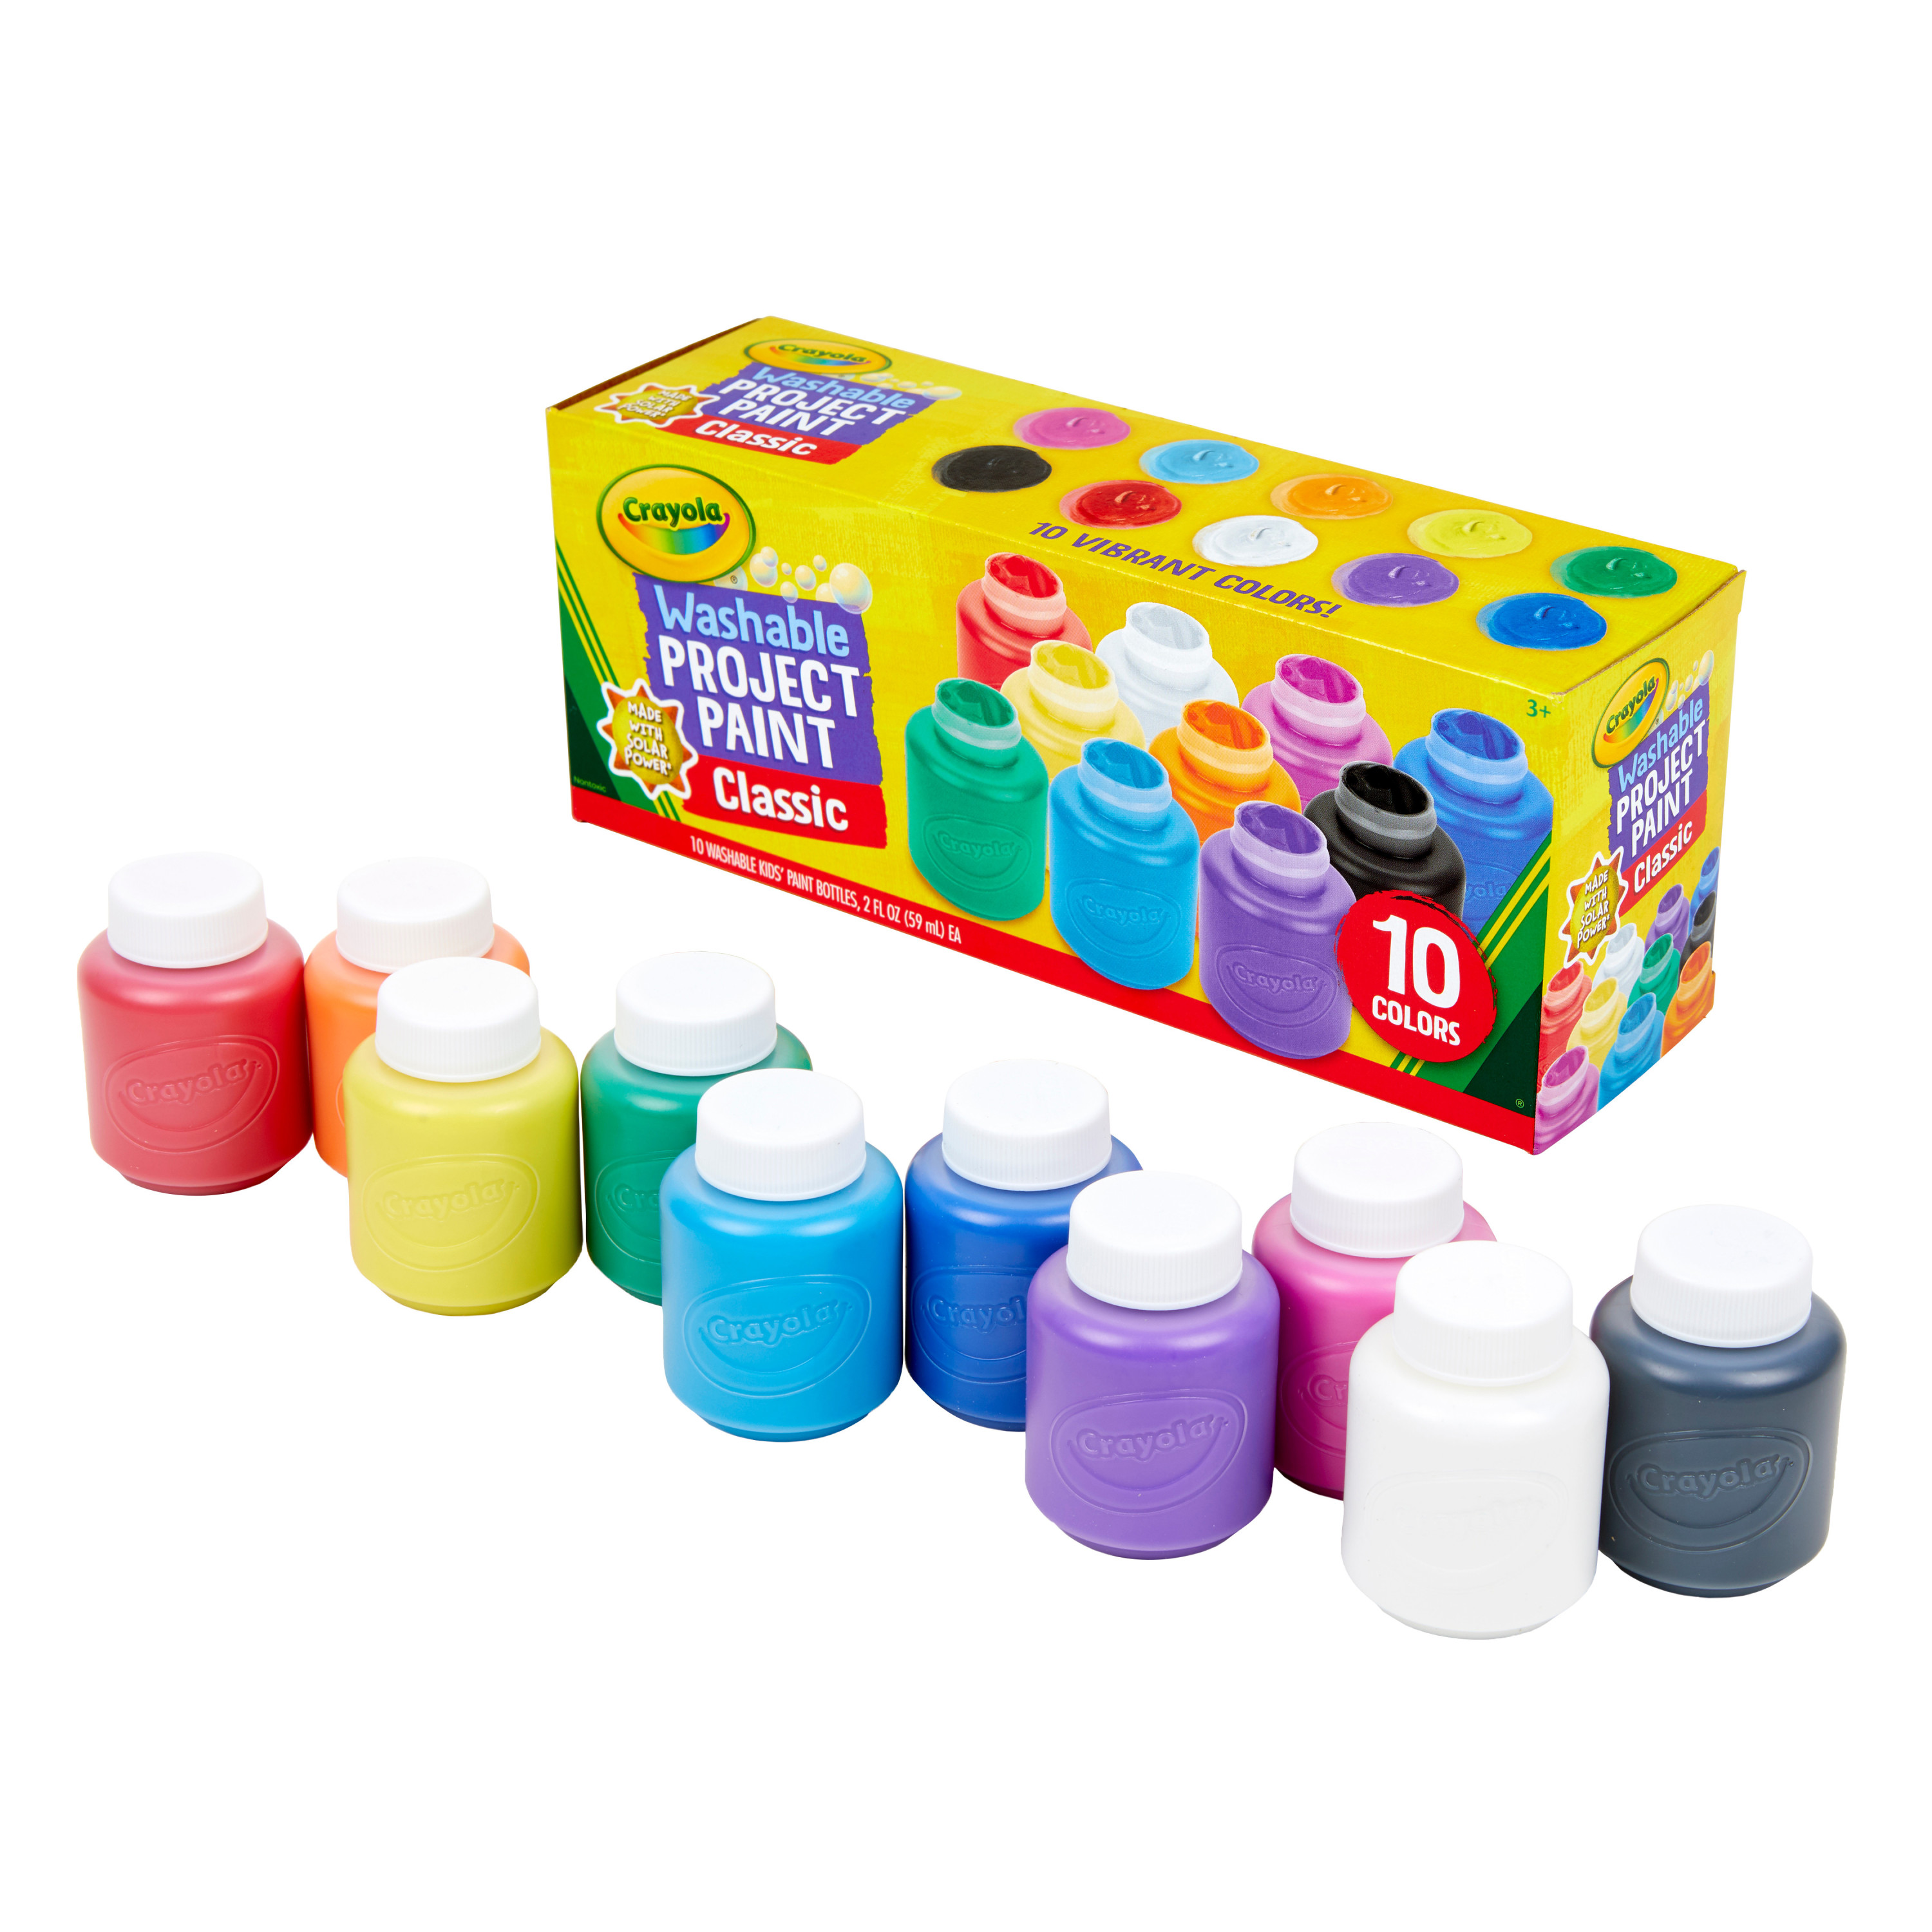 Crayola Washable Kids Paint Set, 10-Colors, Arts and Crafts for Toddlers - image 3 of 8